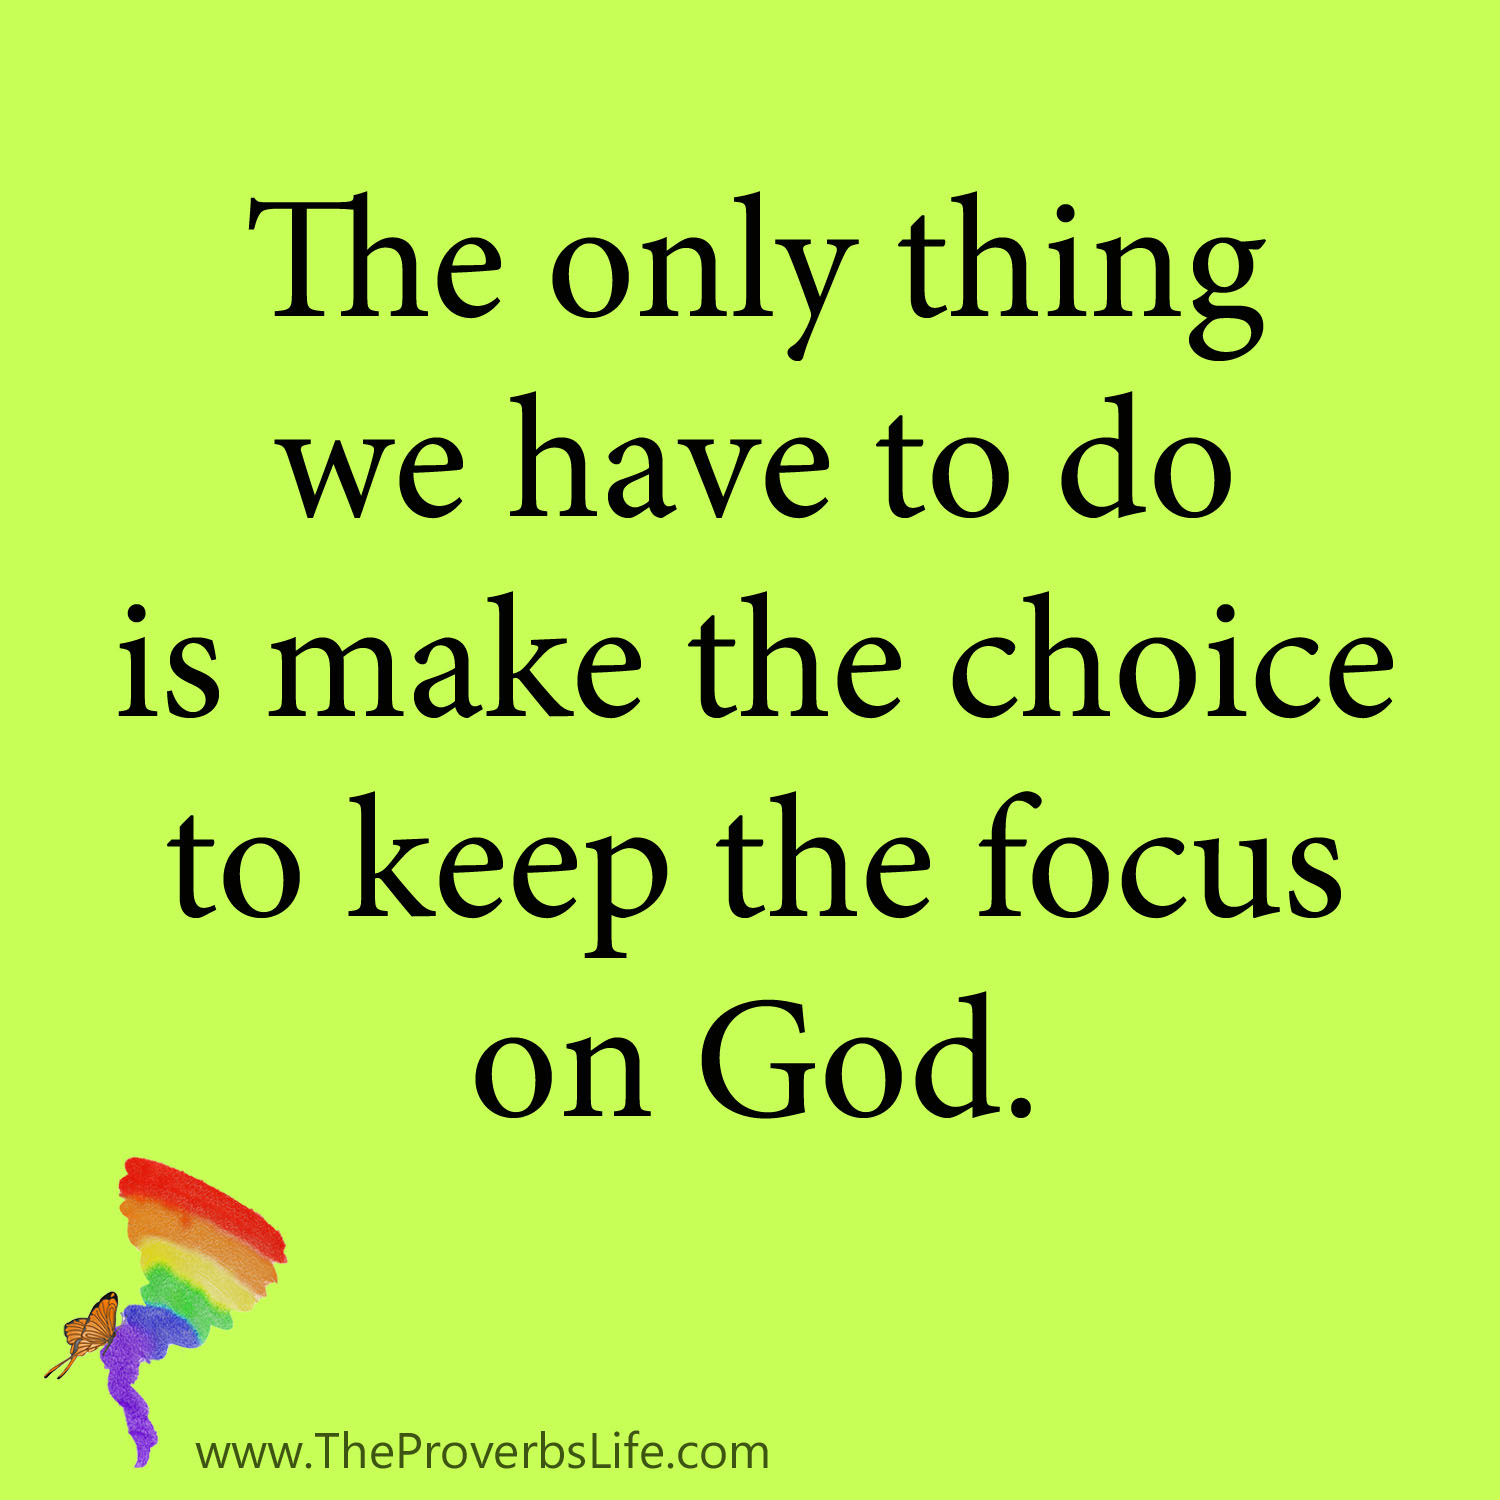 quote - keep the focus on God